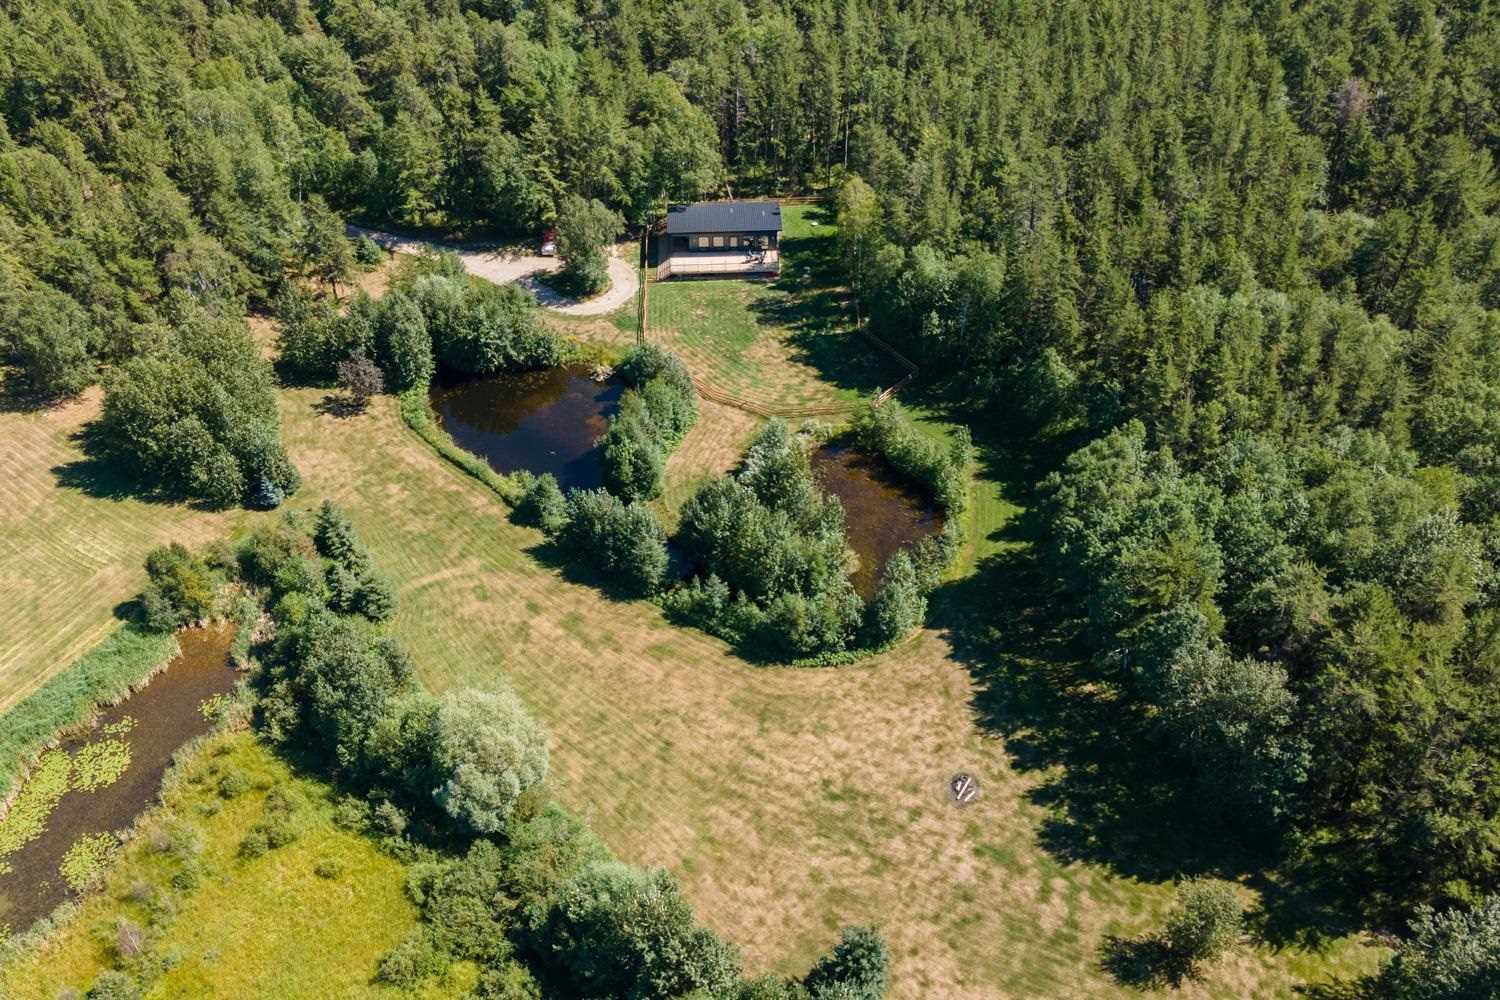 Overhead view of black seacan home and land with two small ponds surrounded by trees